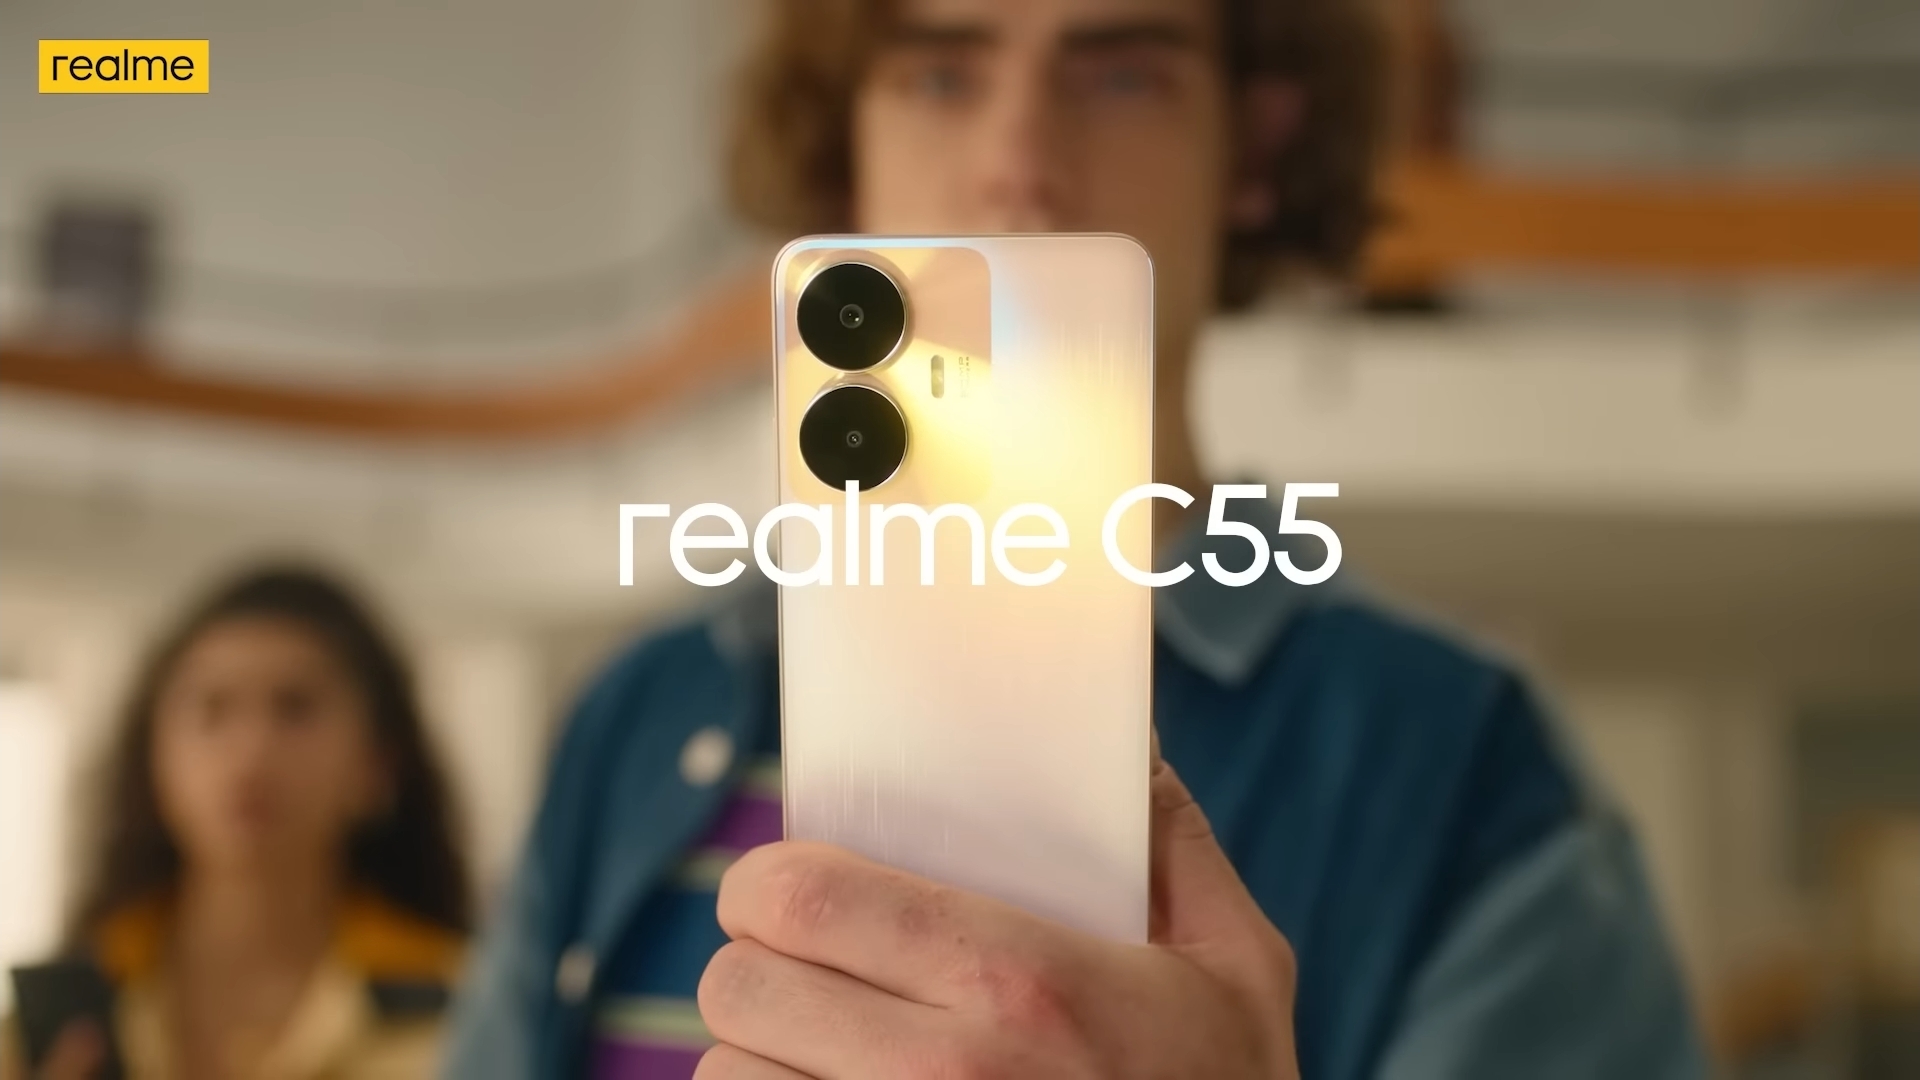 realme c55 update tracker - the go android